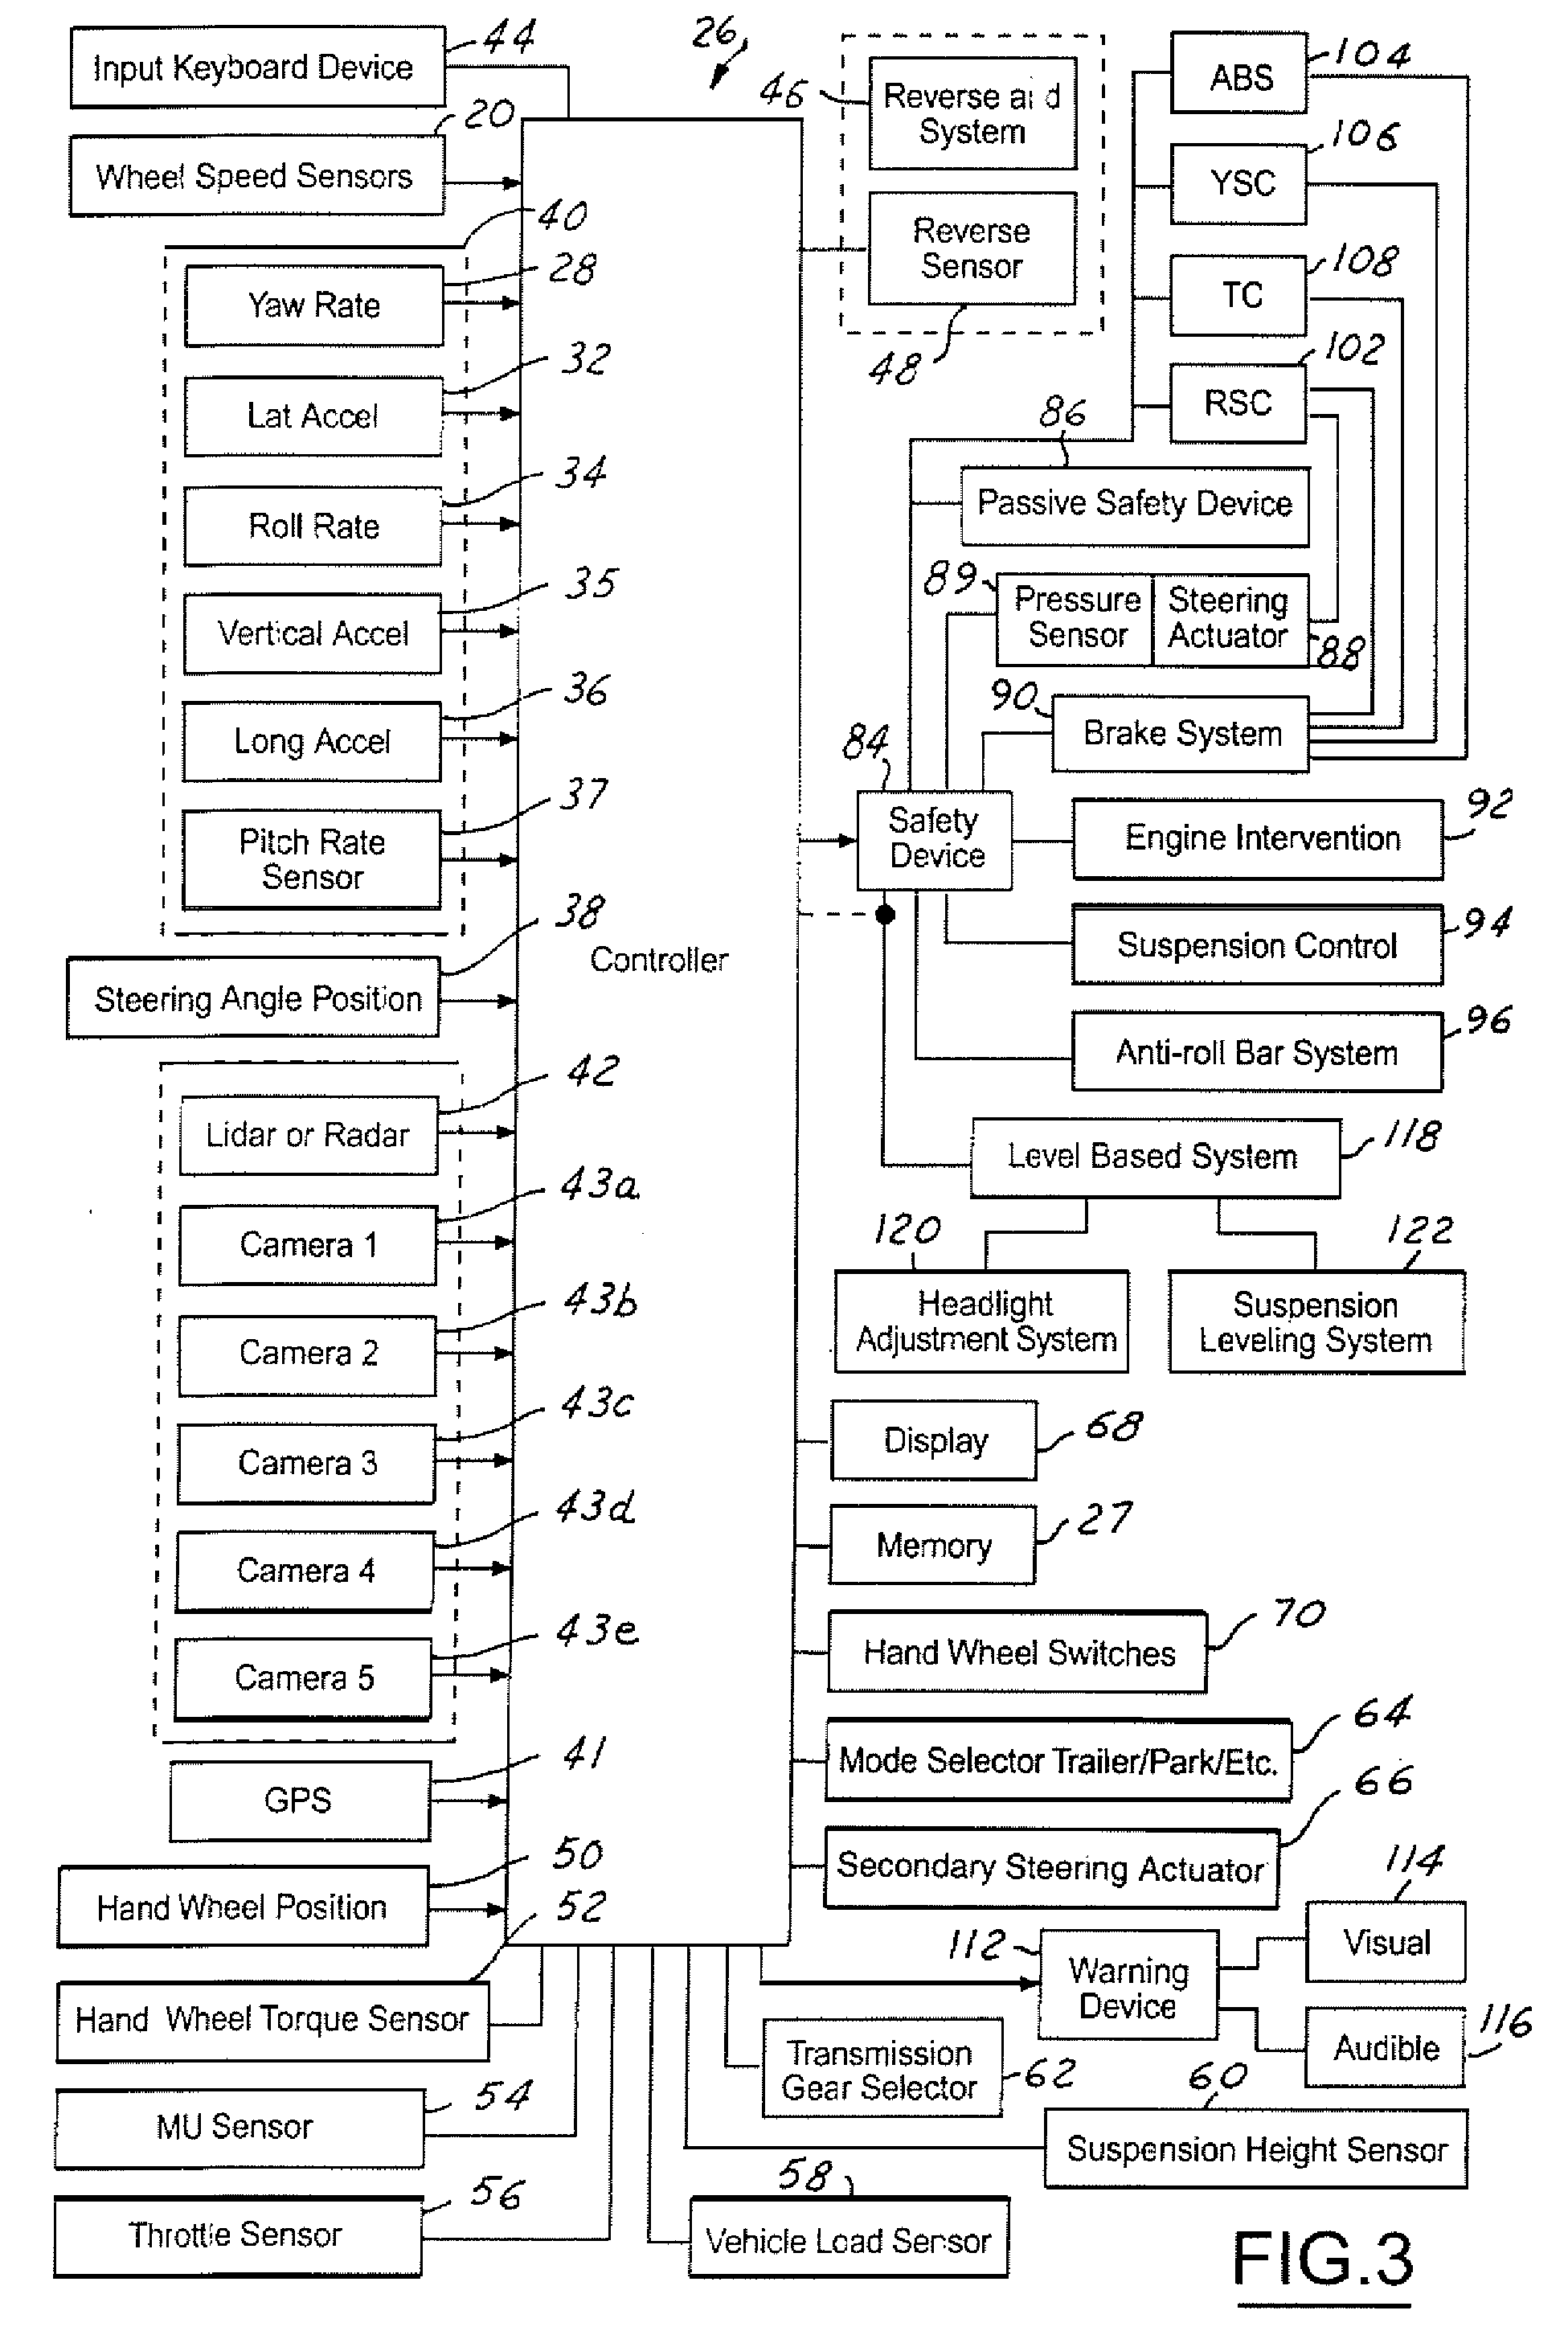 Method and apparatus for controlling brake-steer in an automotive vehicle in reverse